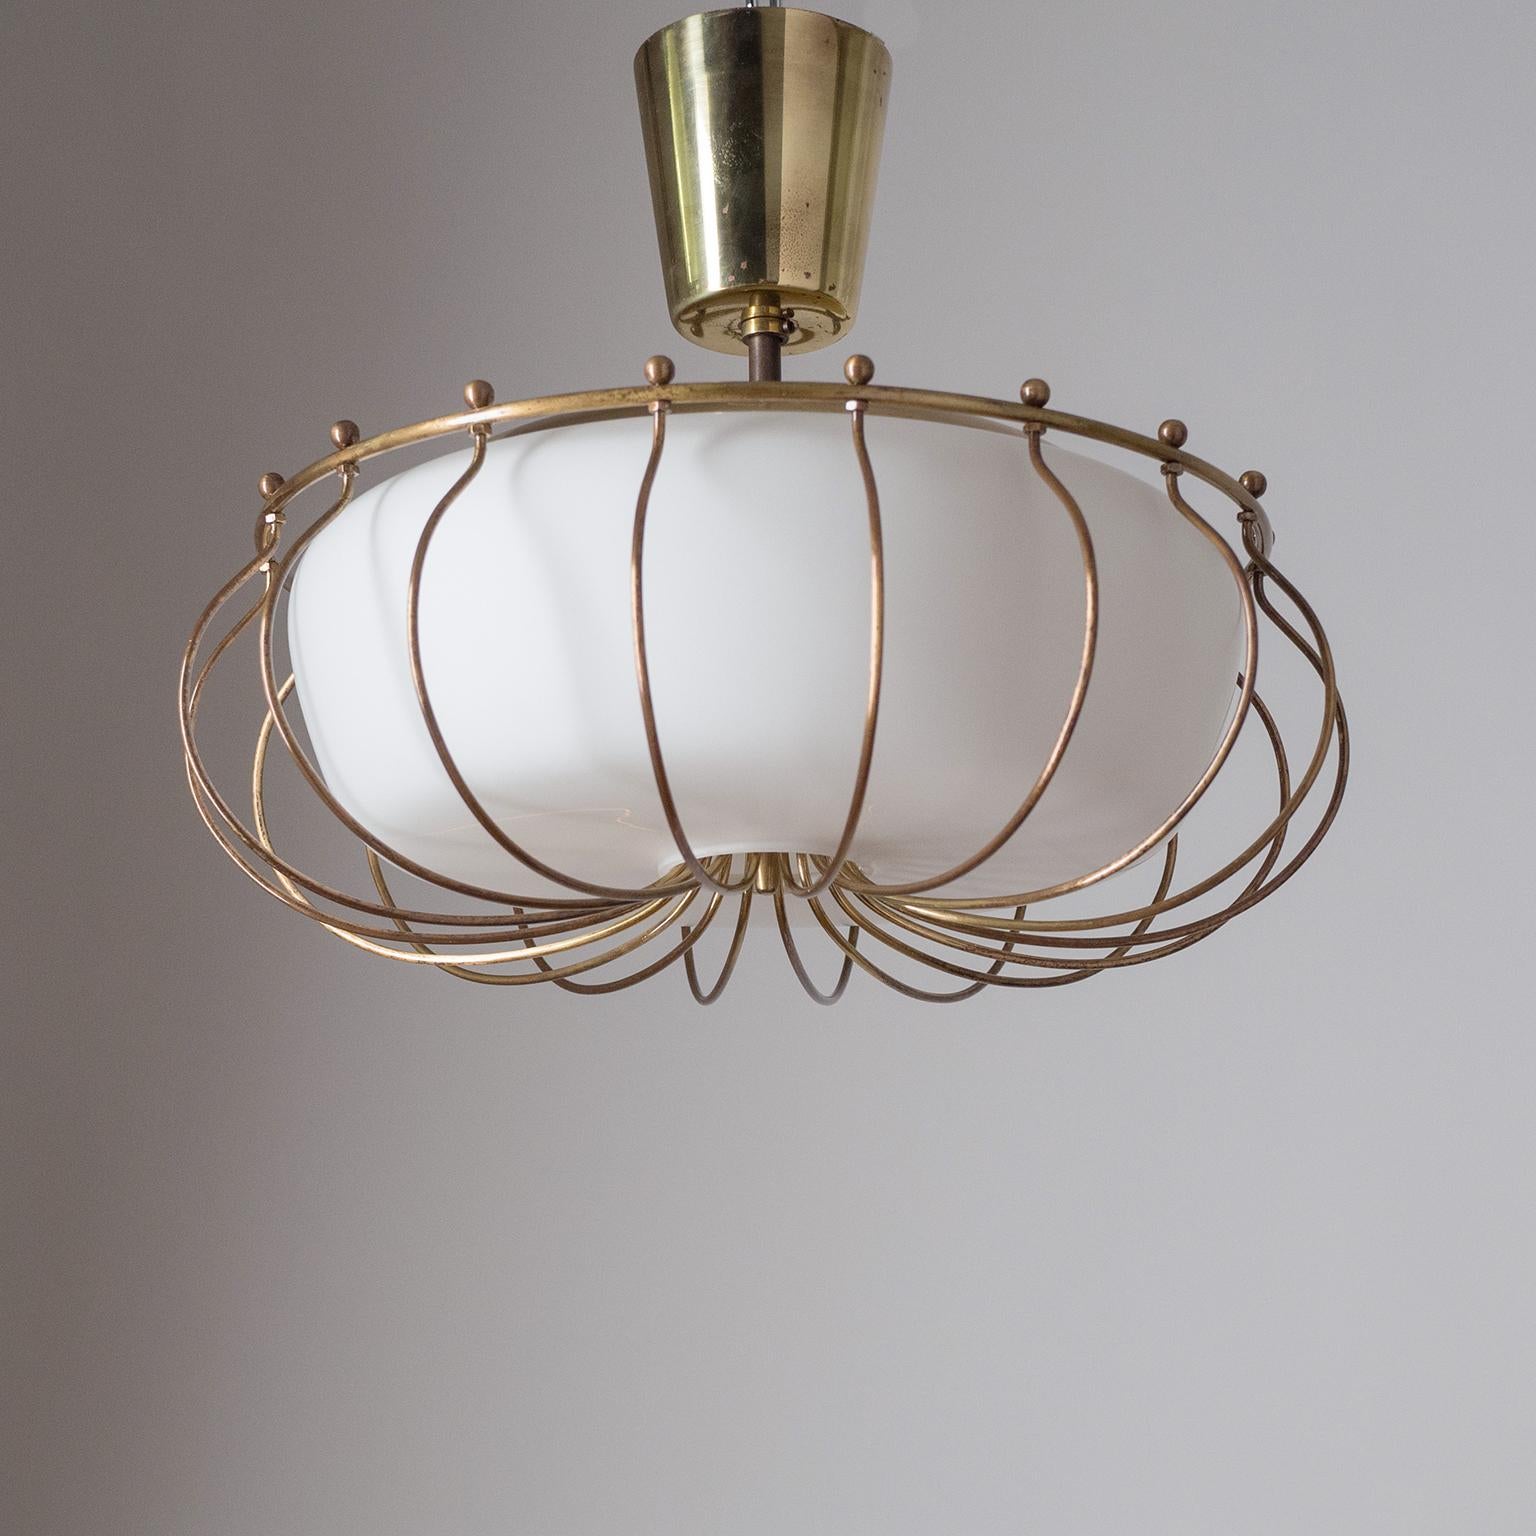 Rare brass and glass ceiling light from the 1940s attributed to J.T. Kalmar. The satin glass diffuser is surrounded by a brass cage-like structure. Three original brass and ceramic E14 sockets with new wiring.